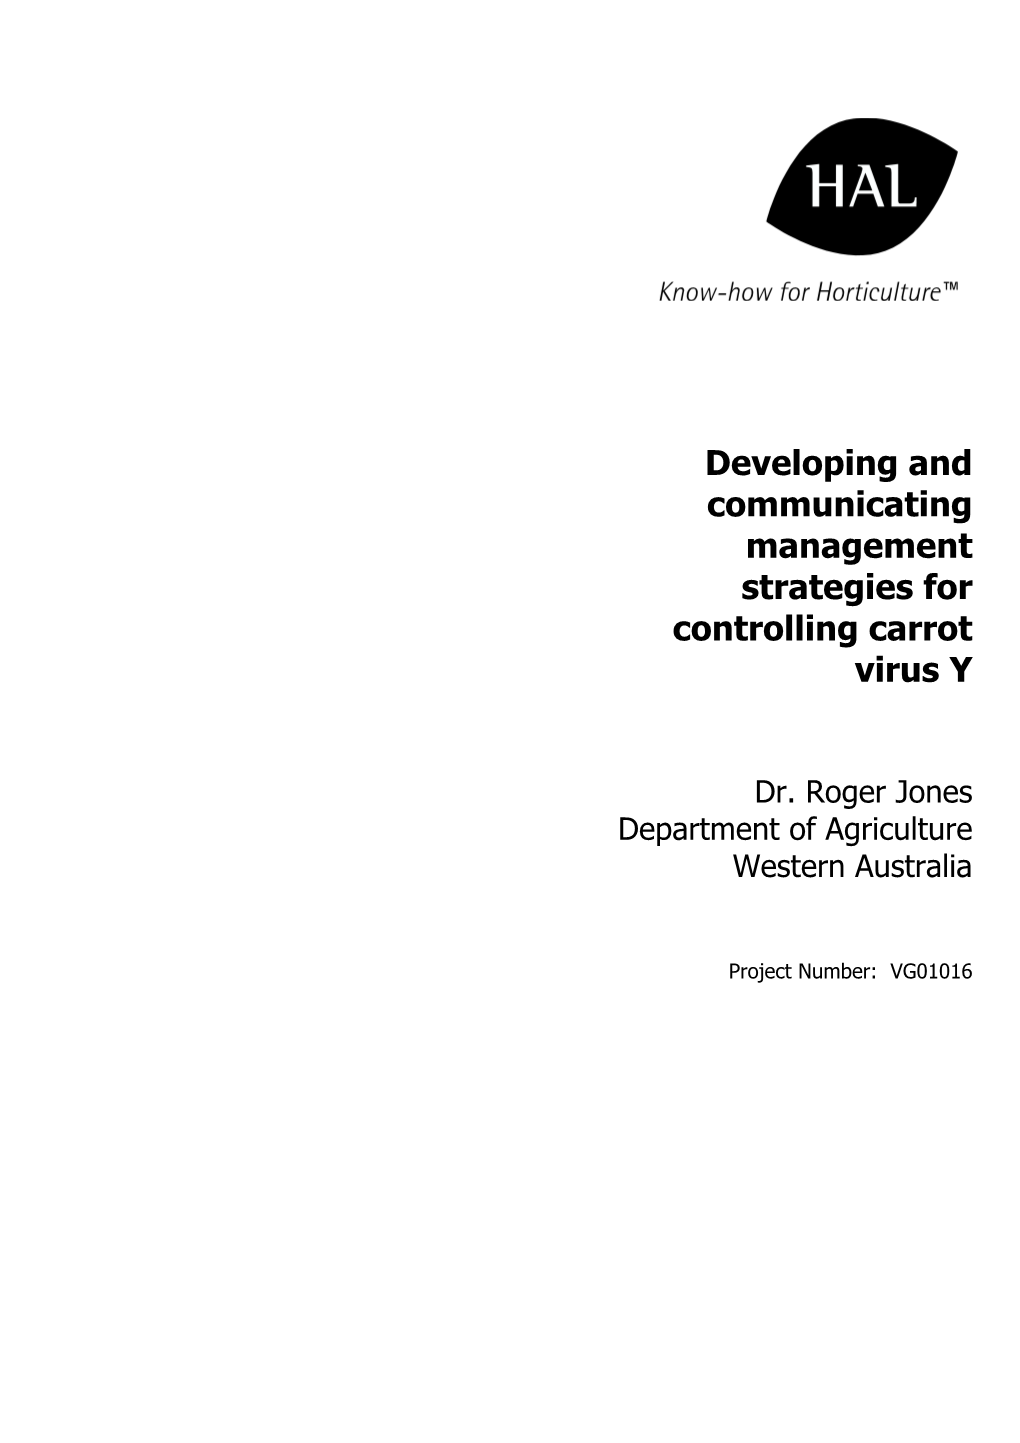 Developing and Communicating Management Strategies for Controlling Carrot Virus Y